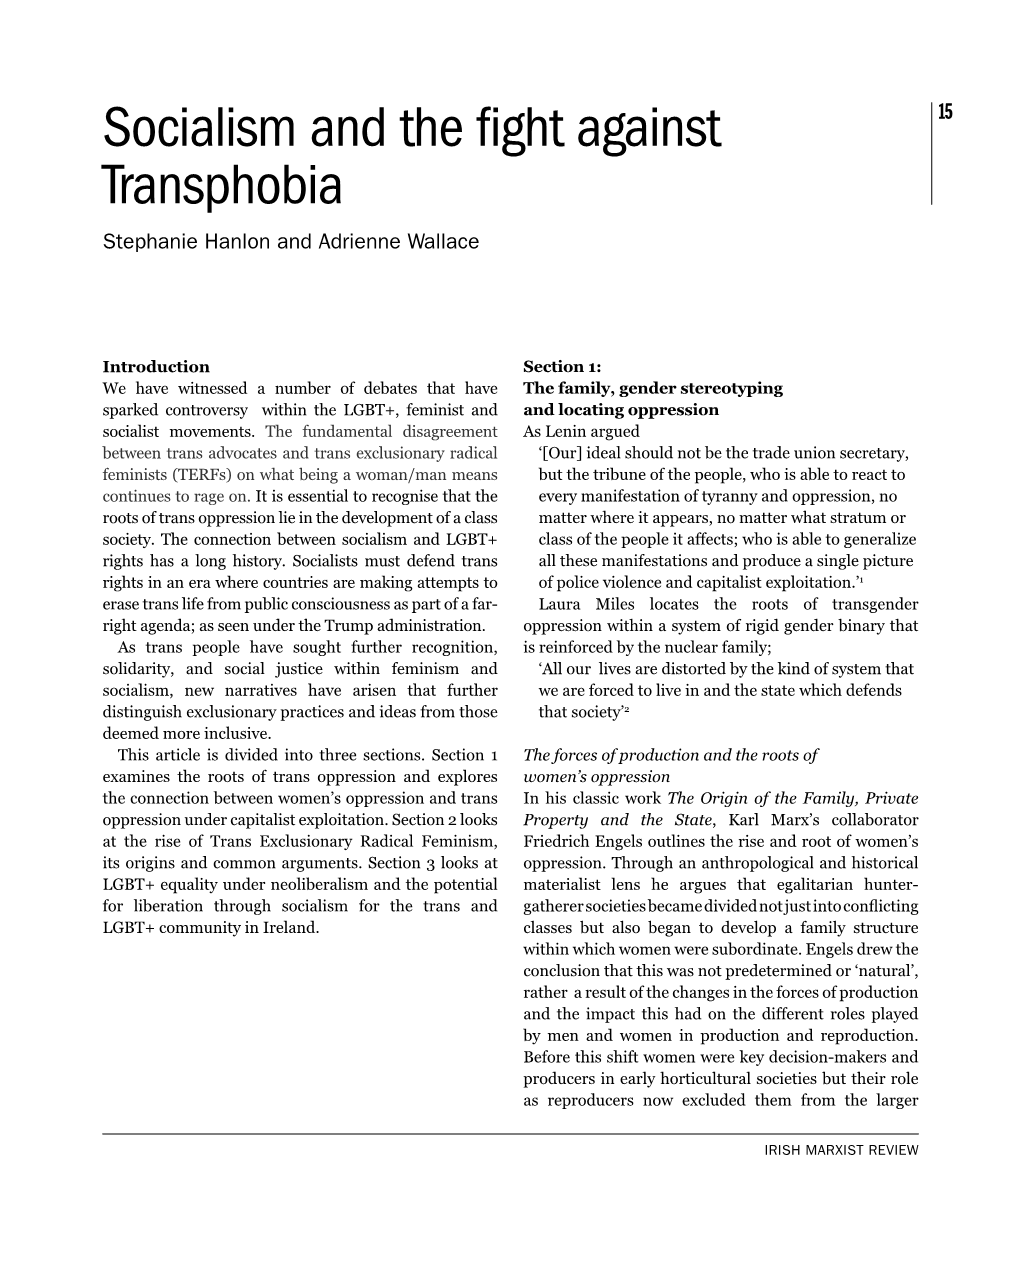 Socialism and the Fight Against Transphobia